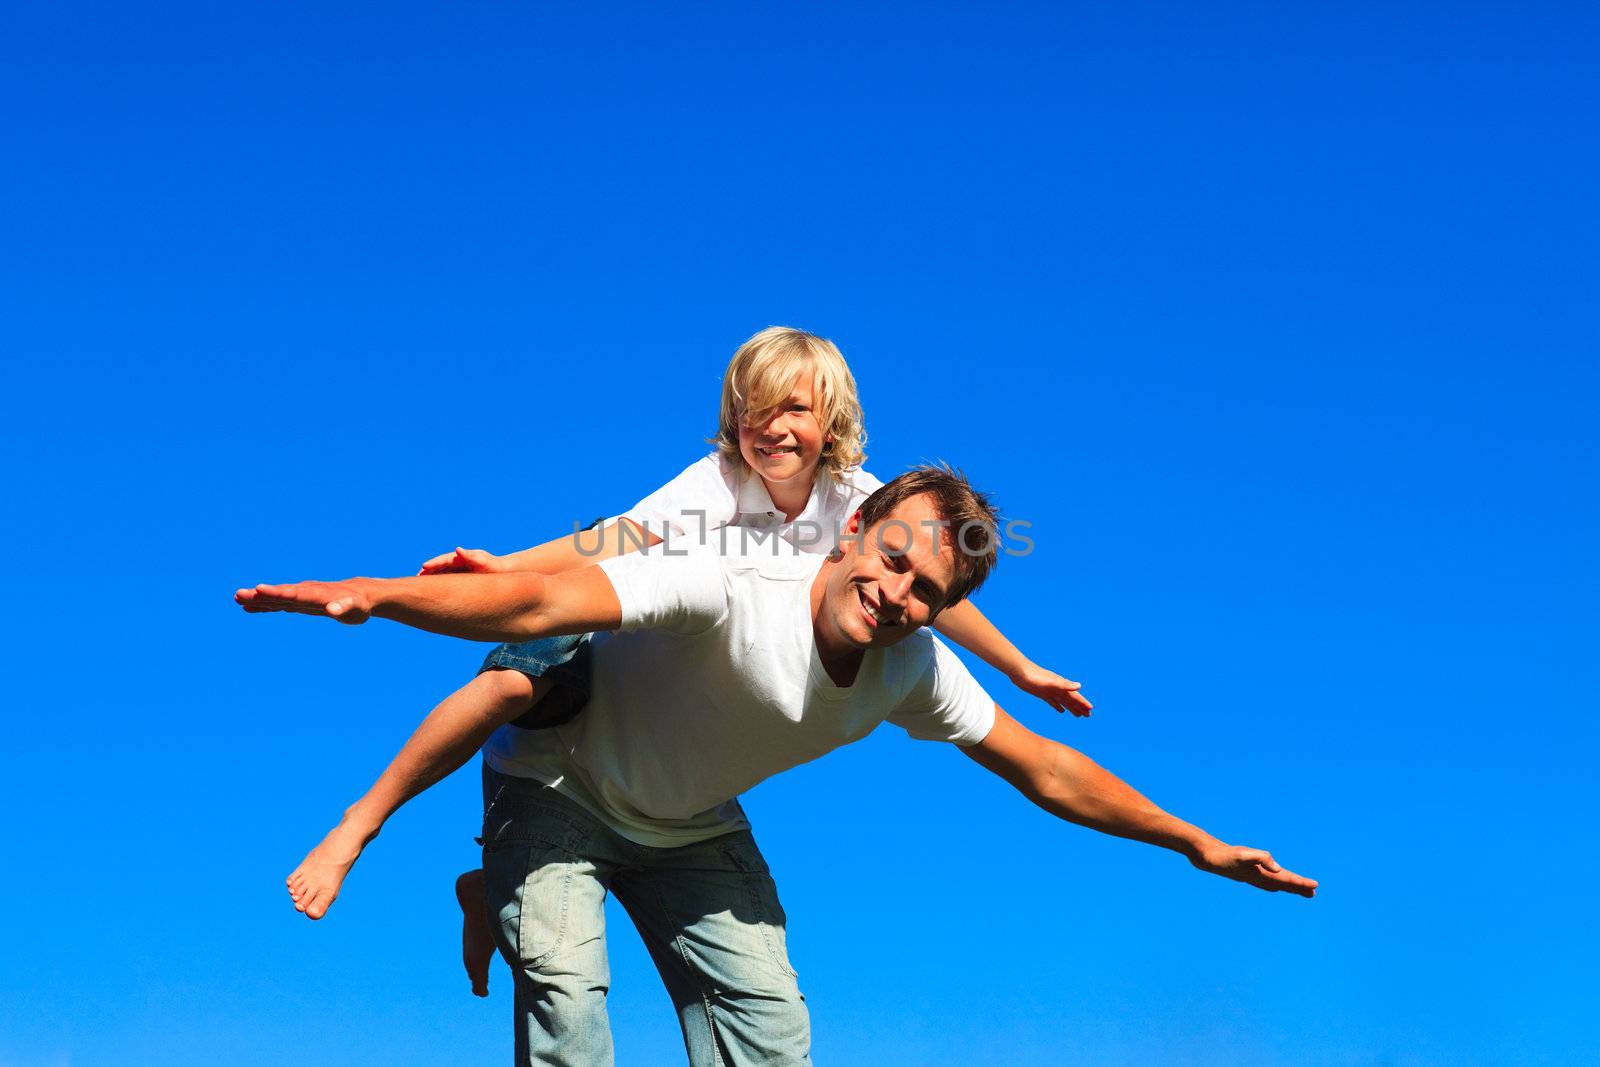 Child on father's back playing airplane outdoors